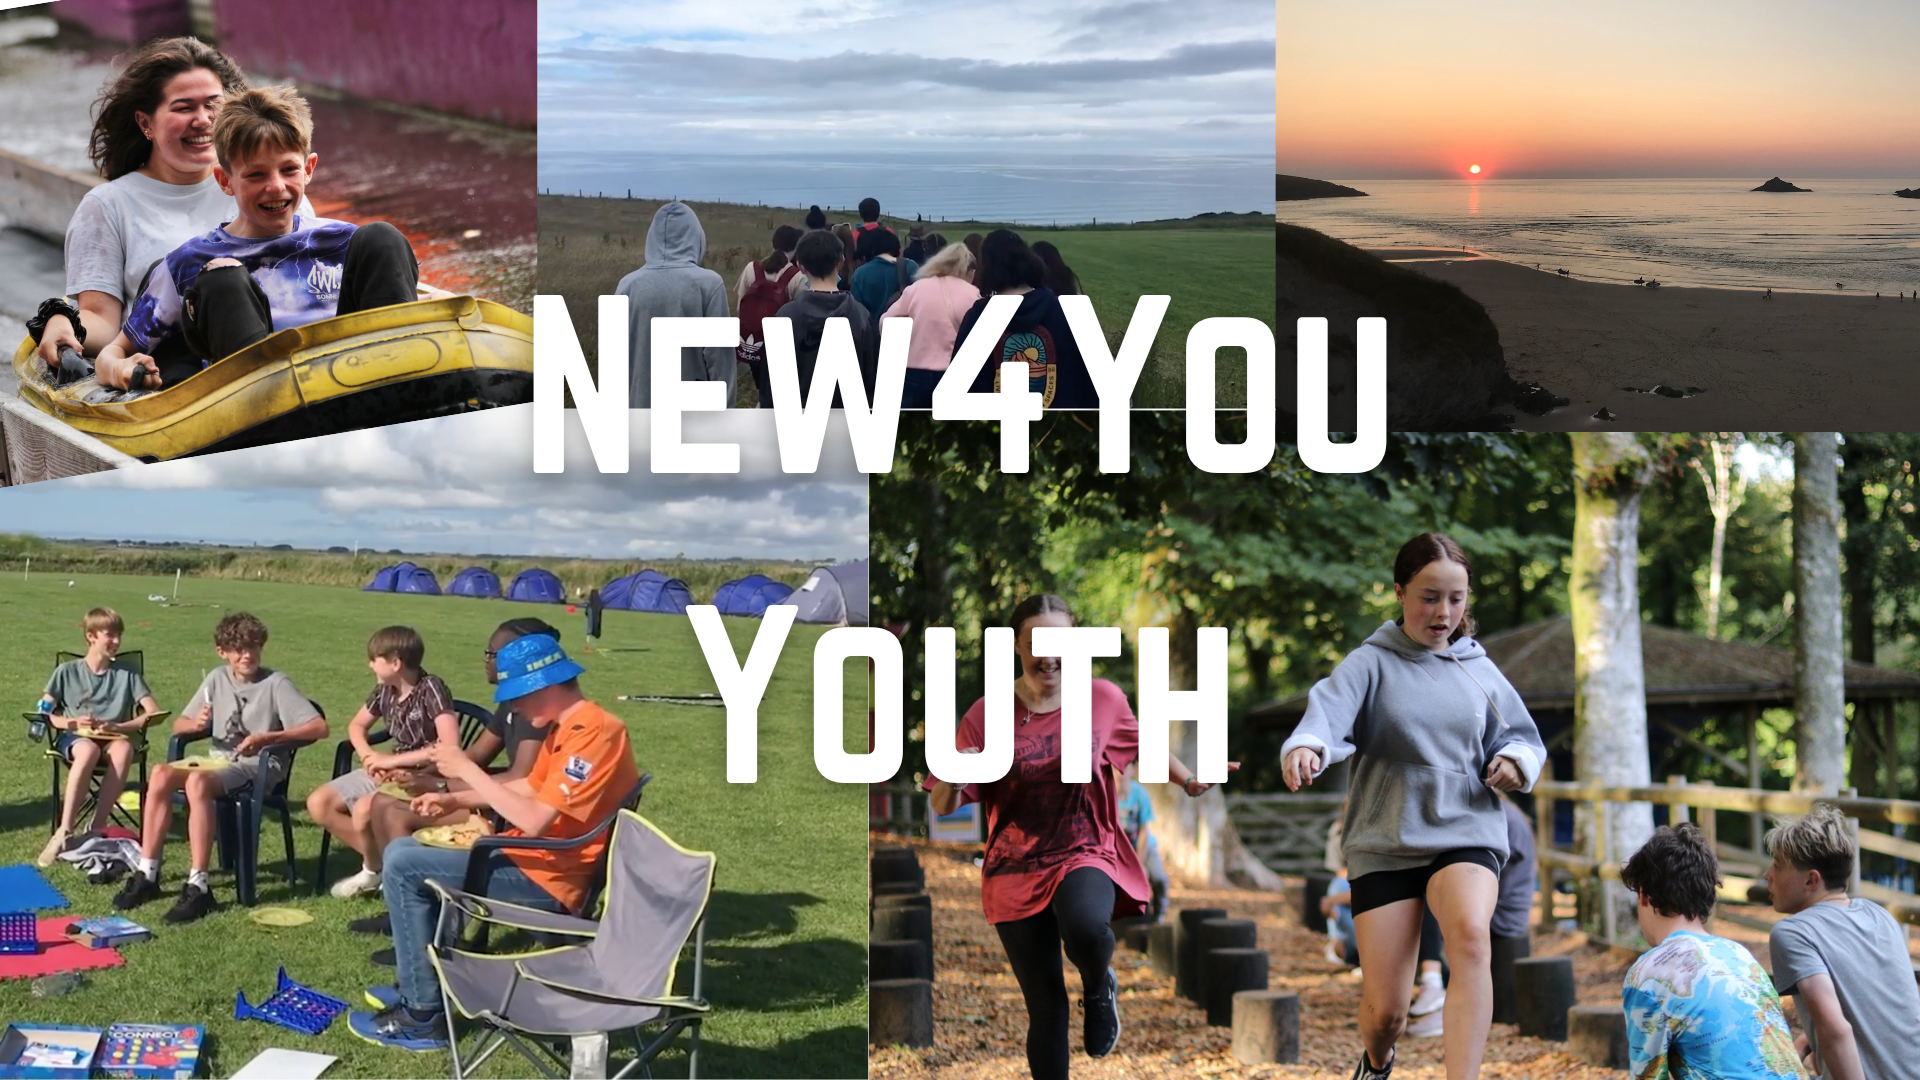 New4You Youth